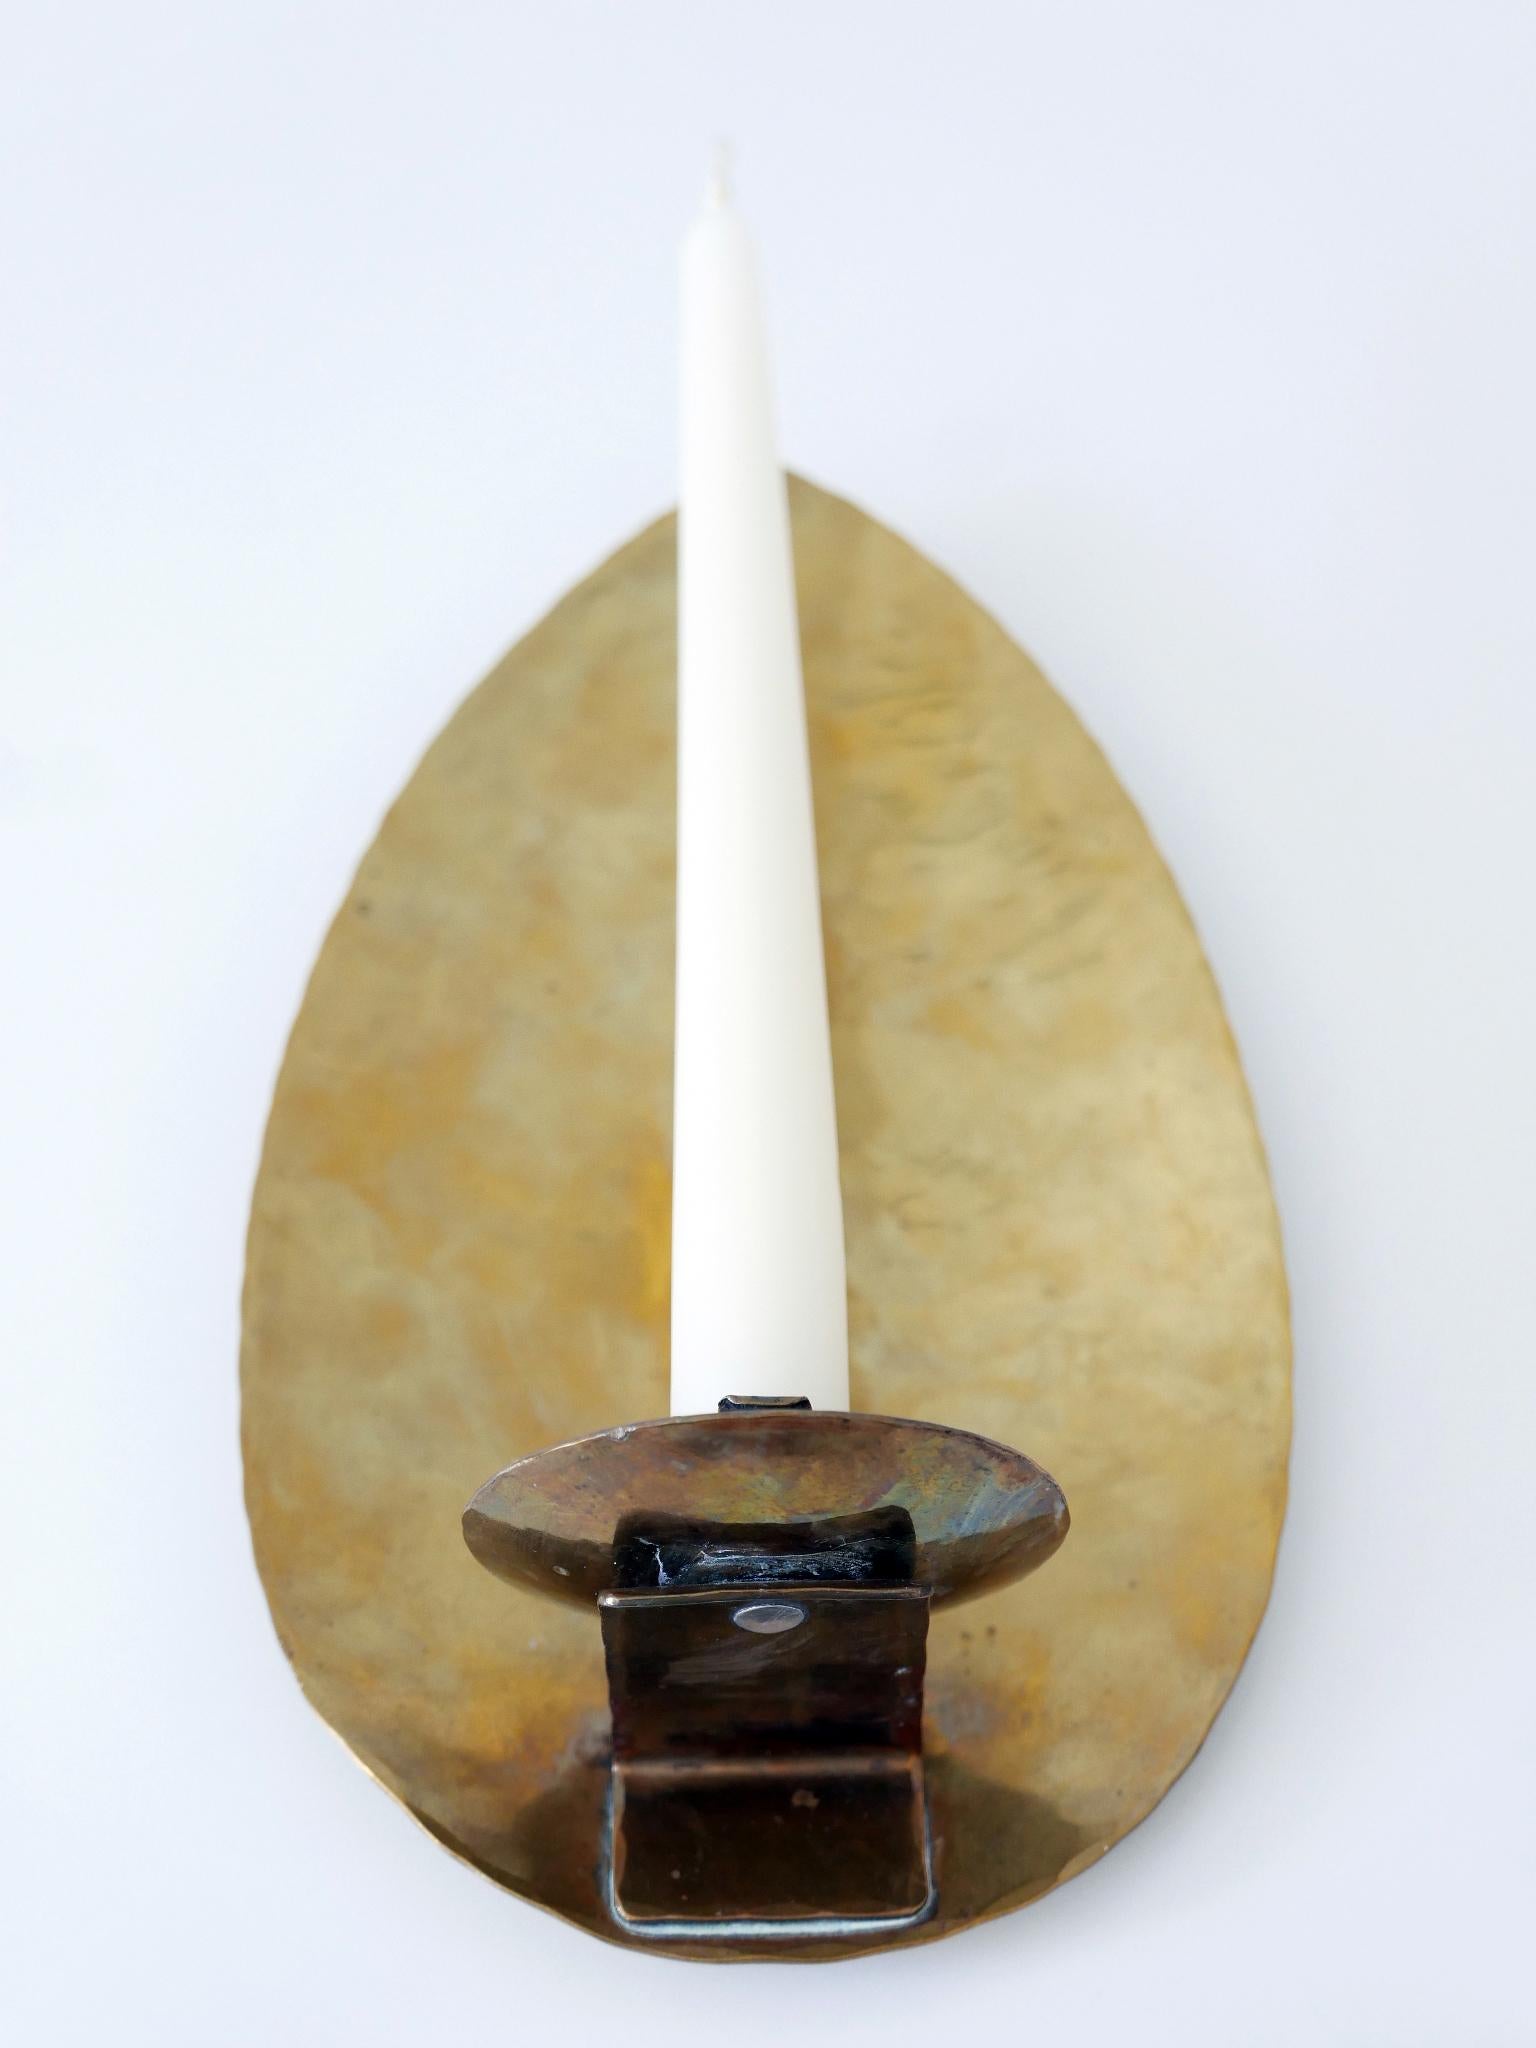 Elegant Hammered Brass Bauhaus Candle Sconce 1930s Germany For Sale 6